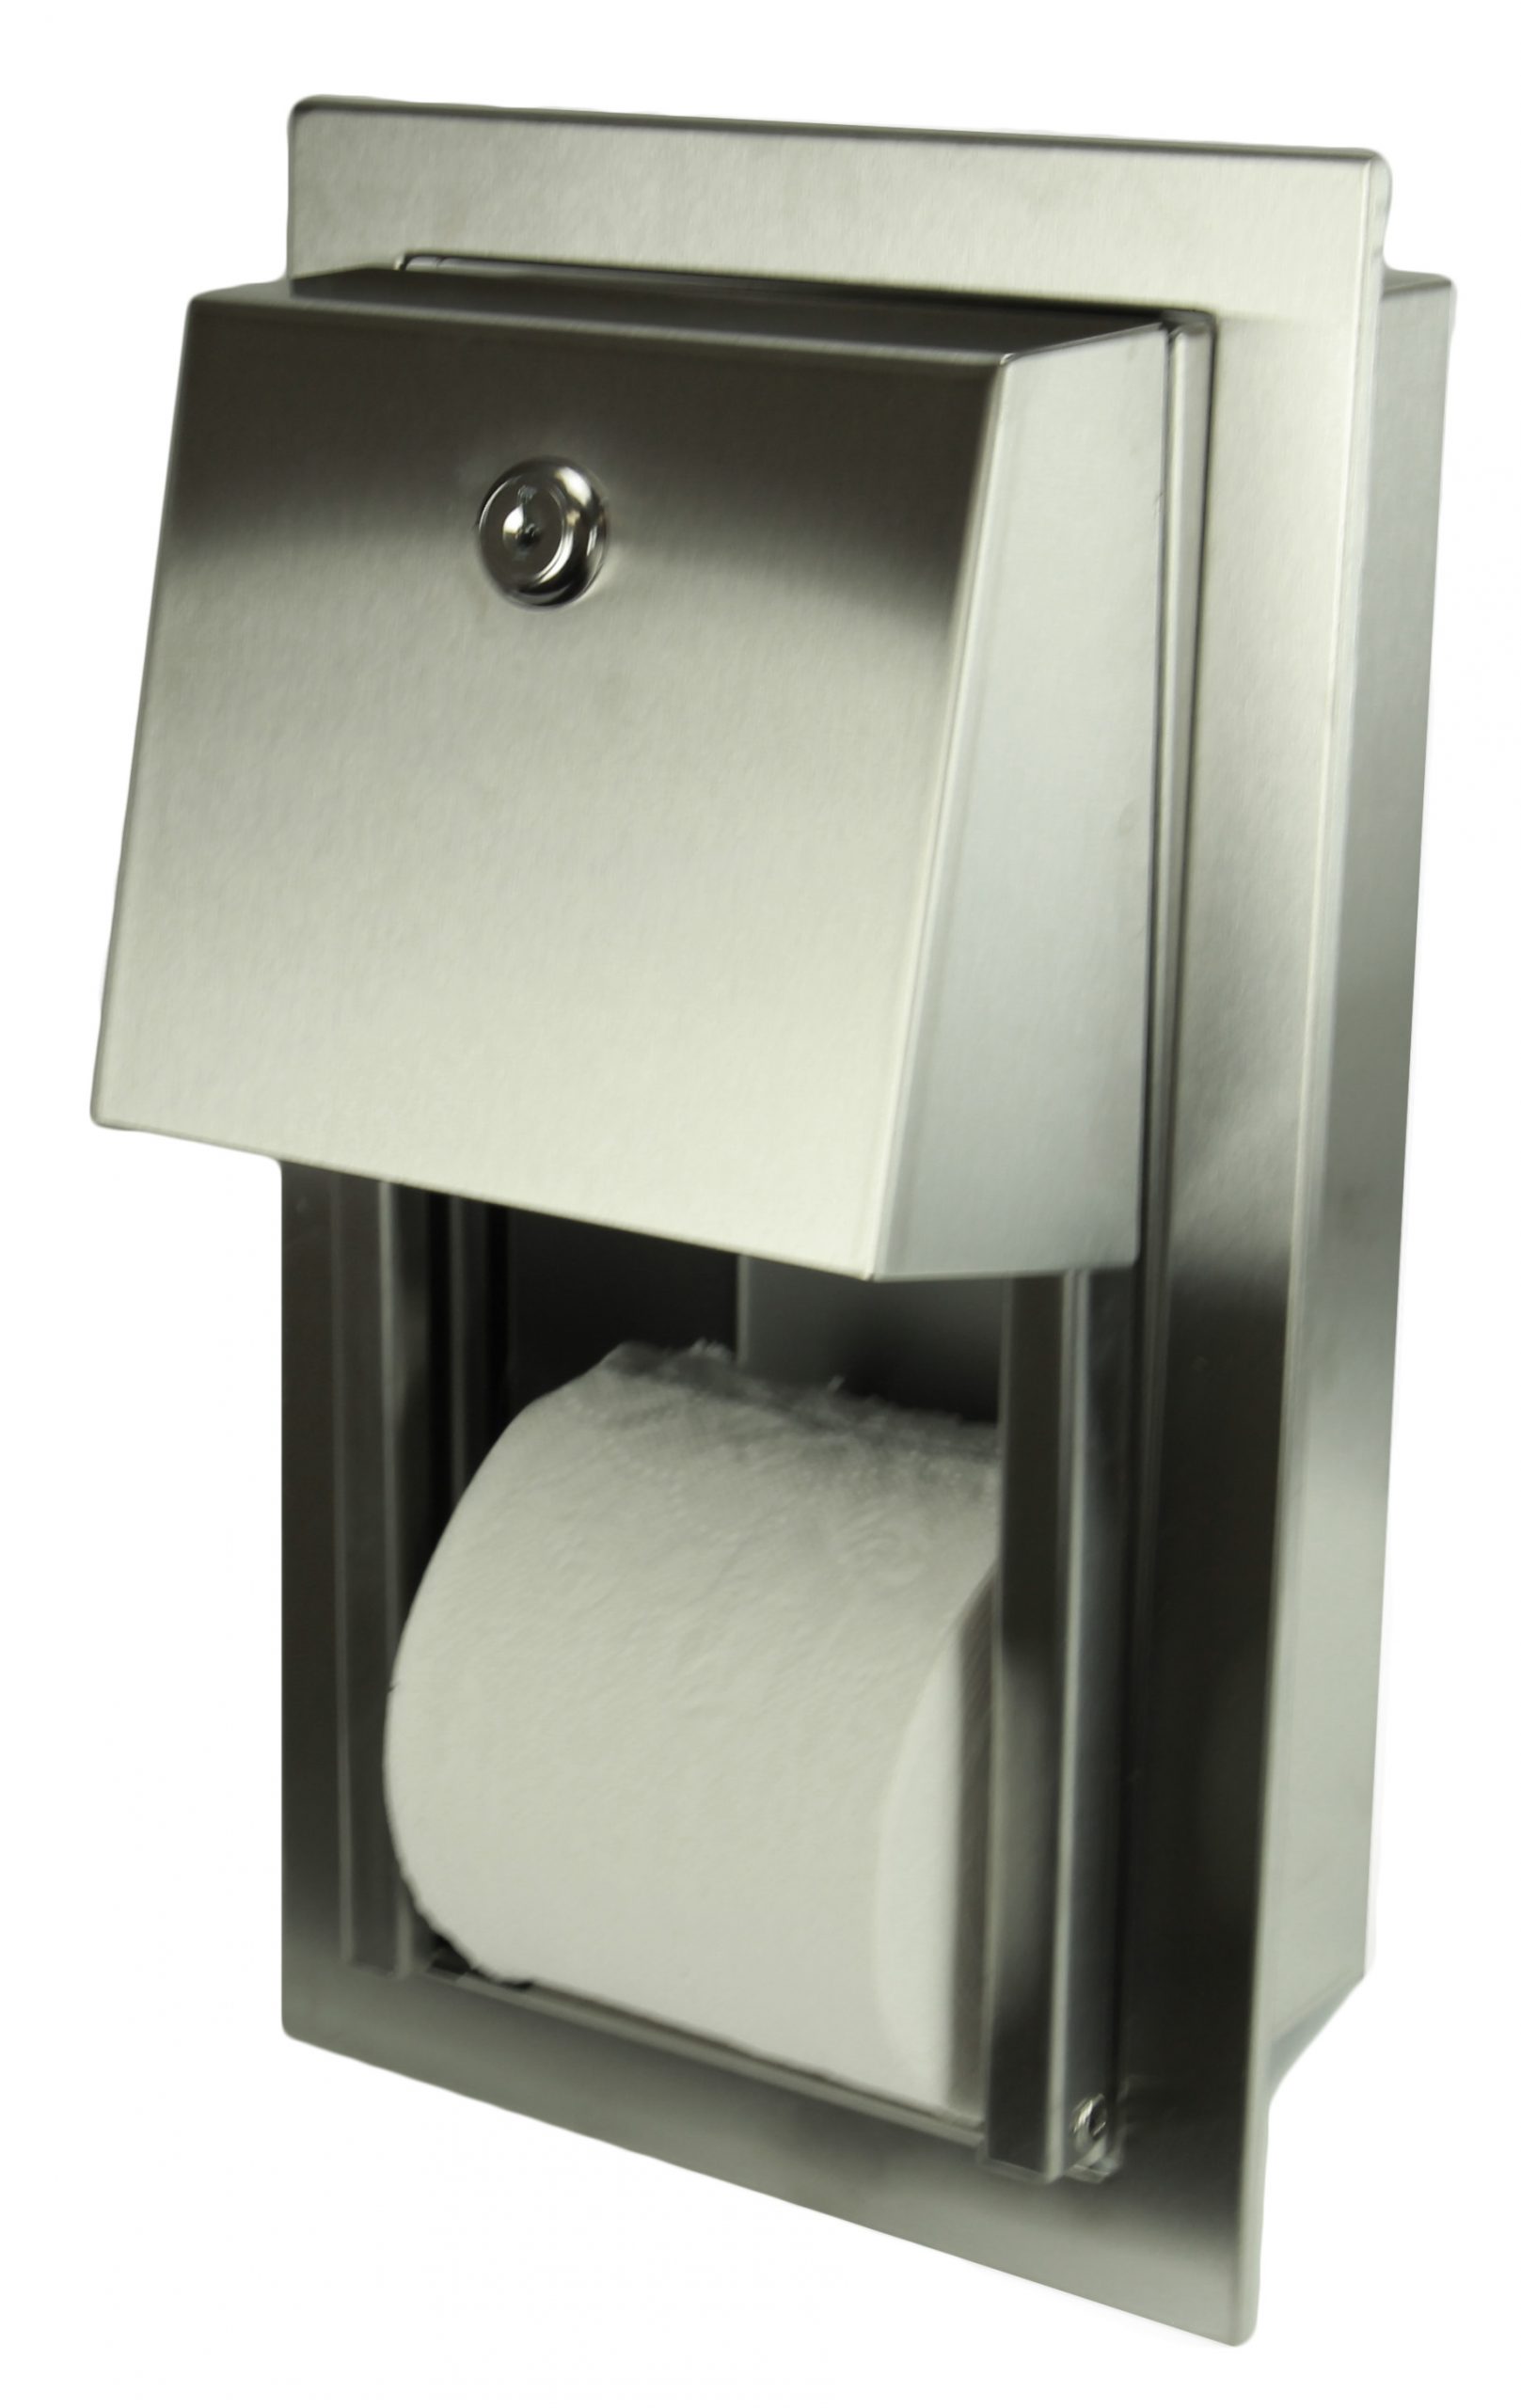 3D file Yet Another Quick Change Toilet Paper Roll Holder - Hood